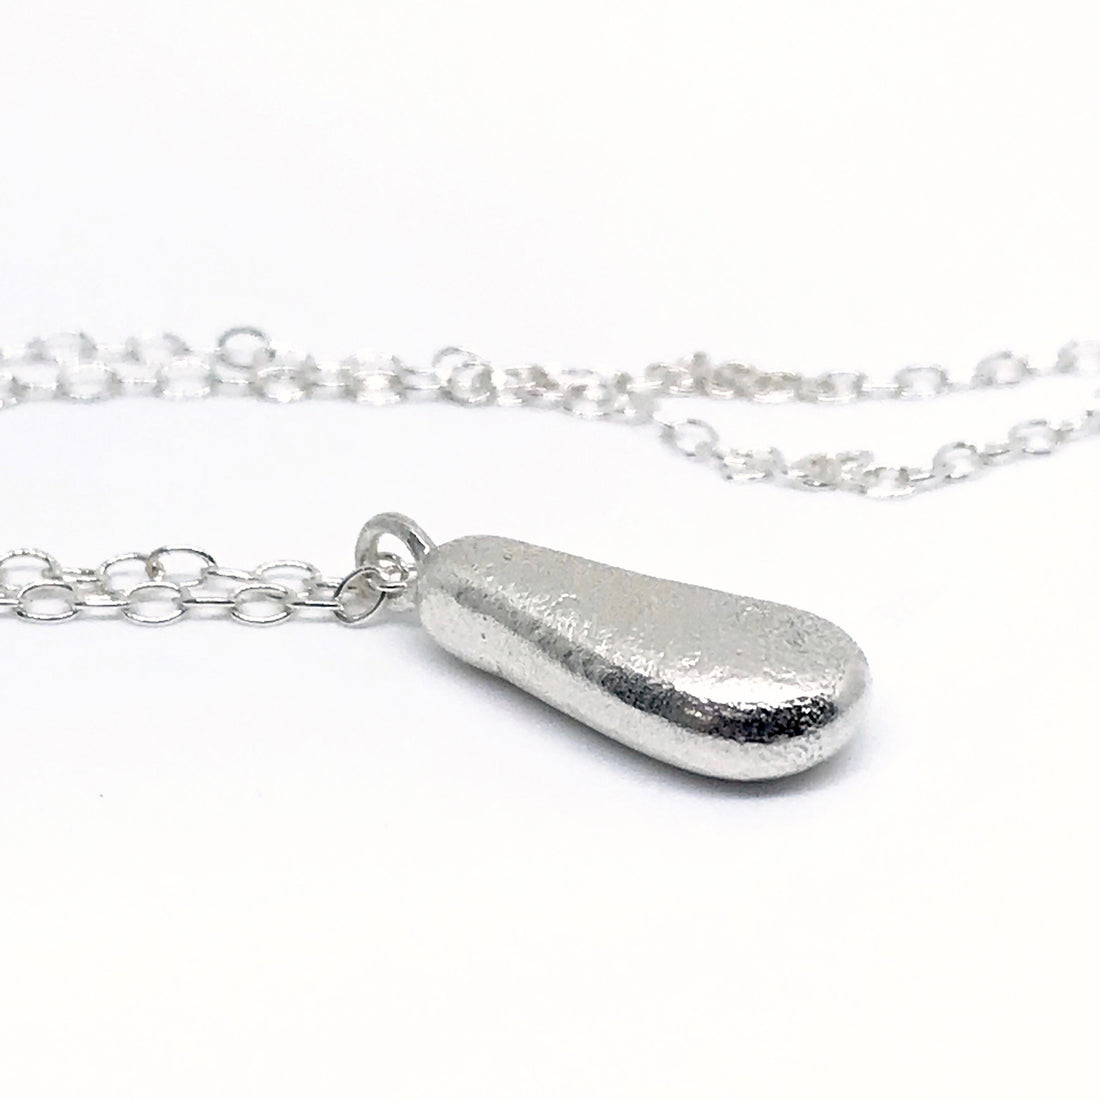 Long Silver Necklace with Seaglass Nugget Charm – Kriket Broadhurst jewellery